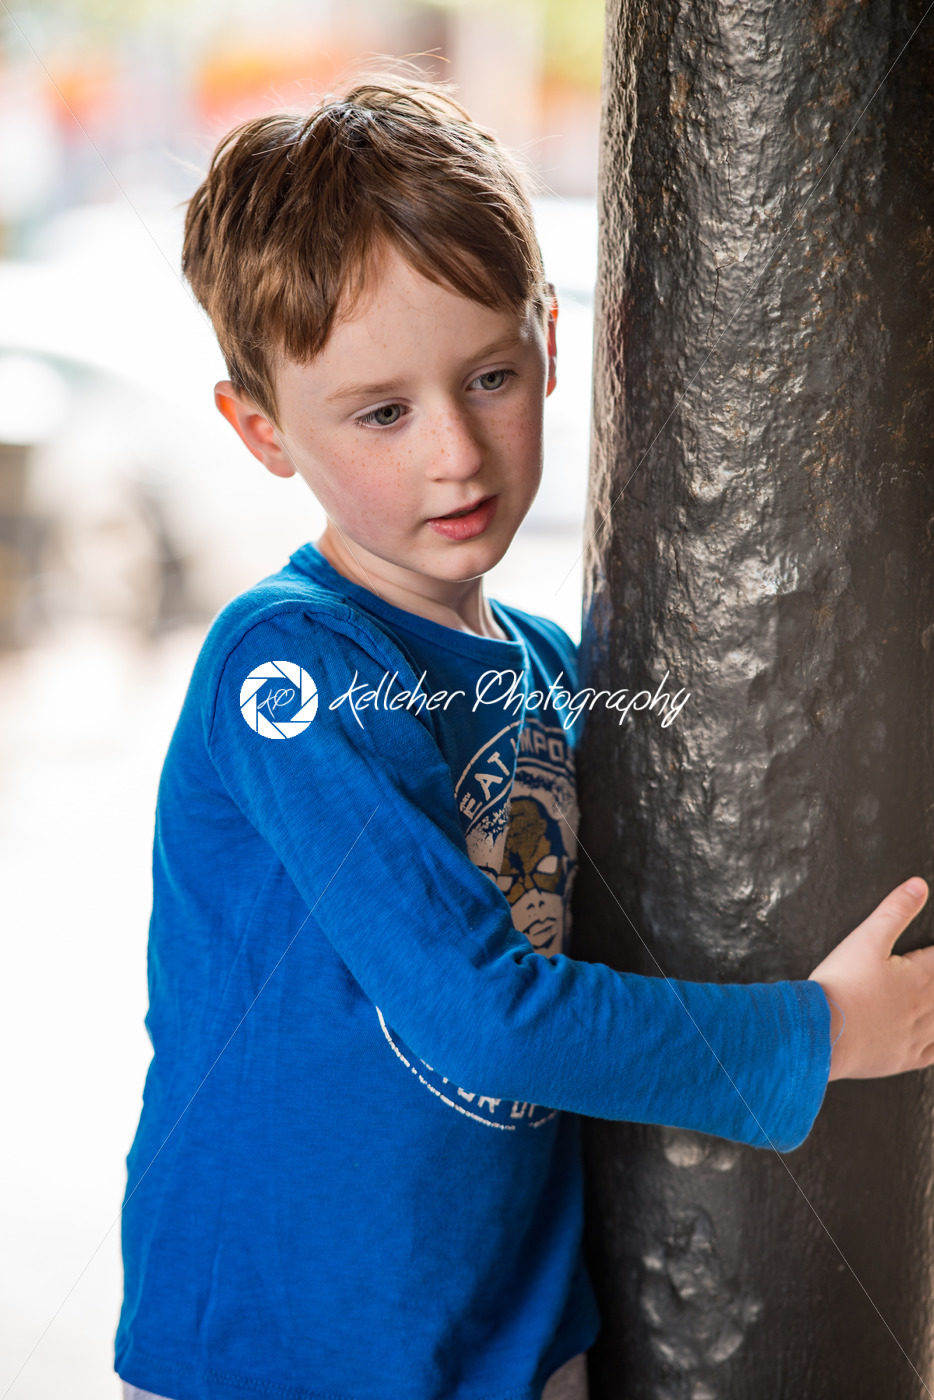 Young little boy portrait looking and smiling at the camera. - Kelleher Photography Store